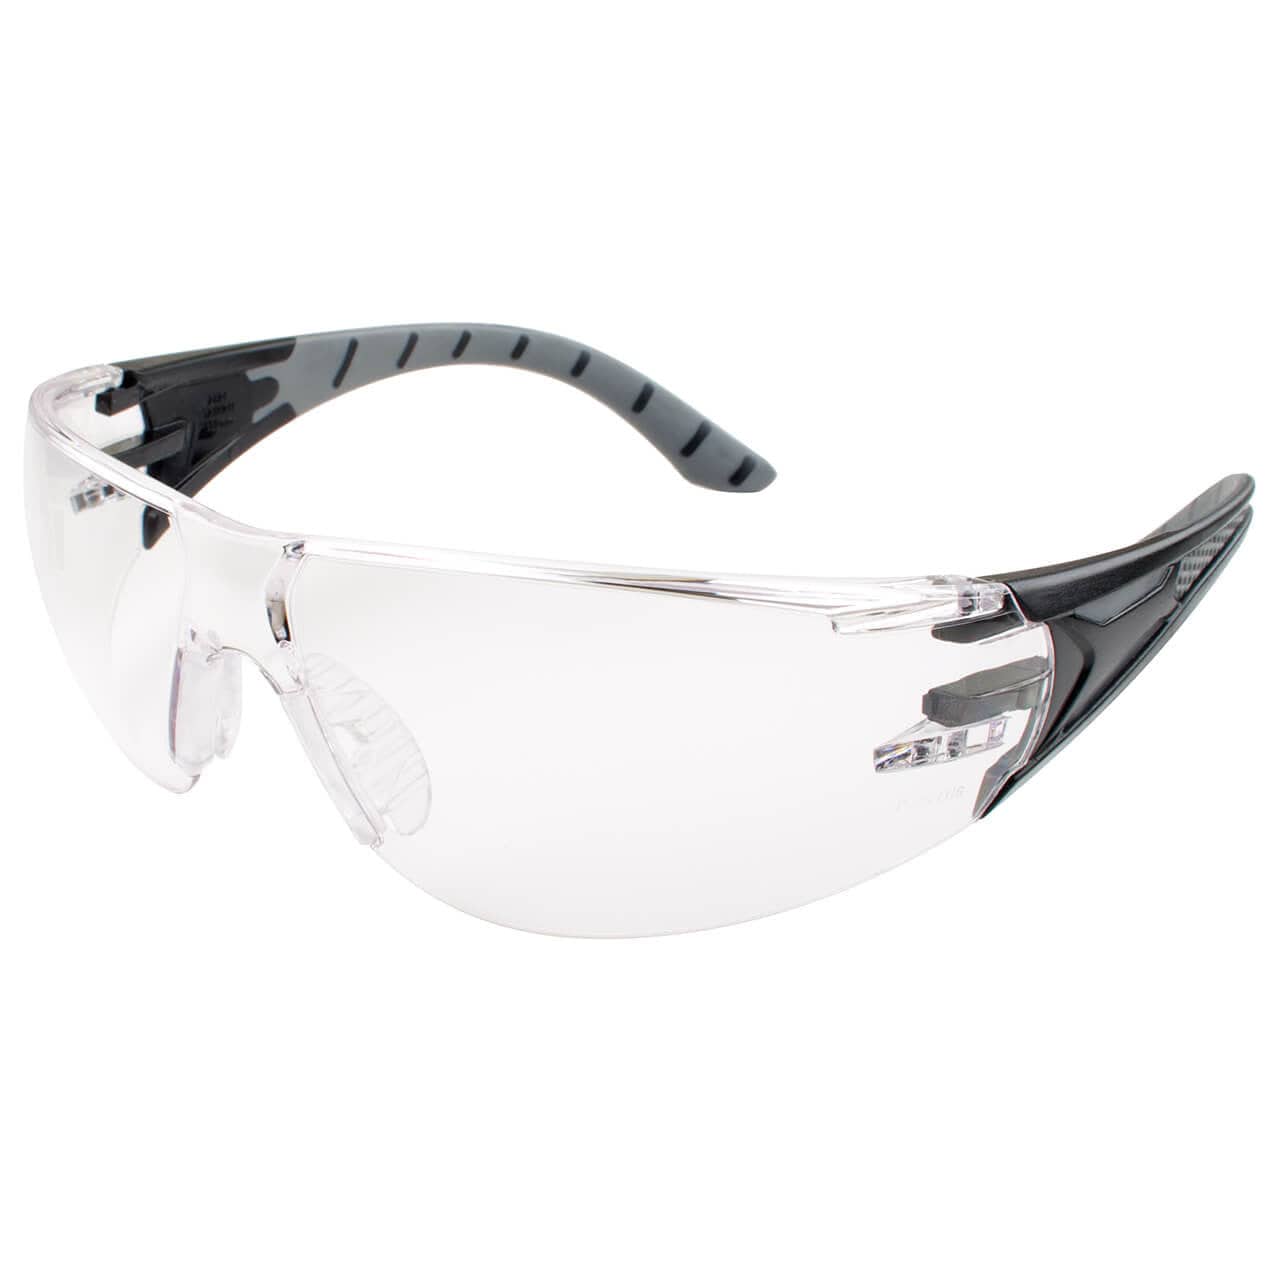 Metel M50 Safety Glasses with Clear Anti-Fog Lenses